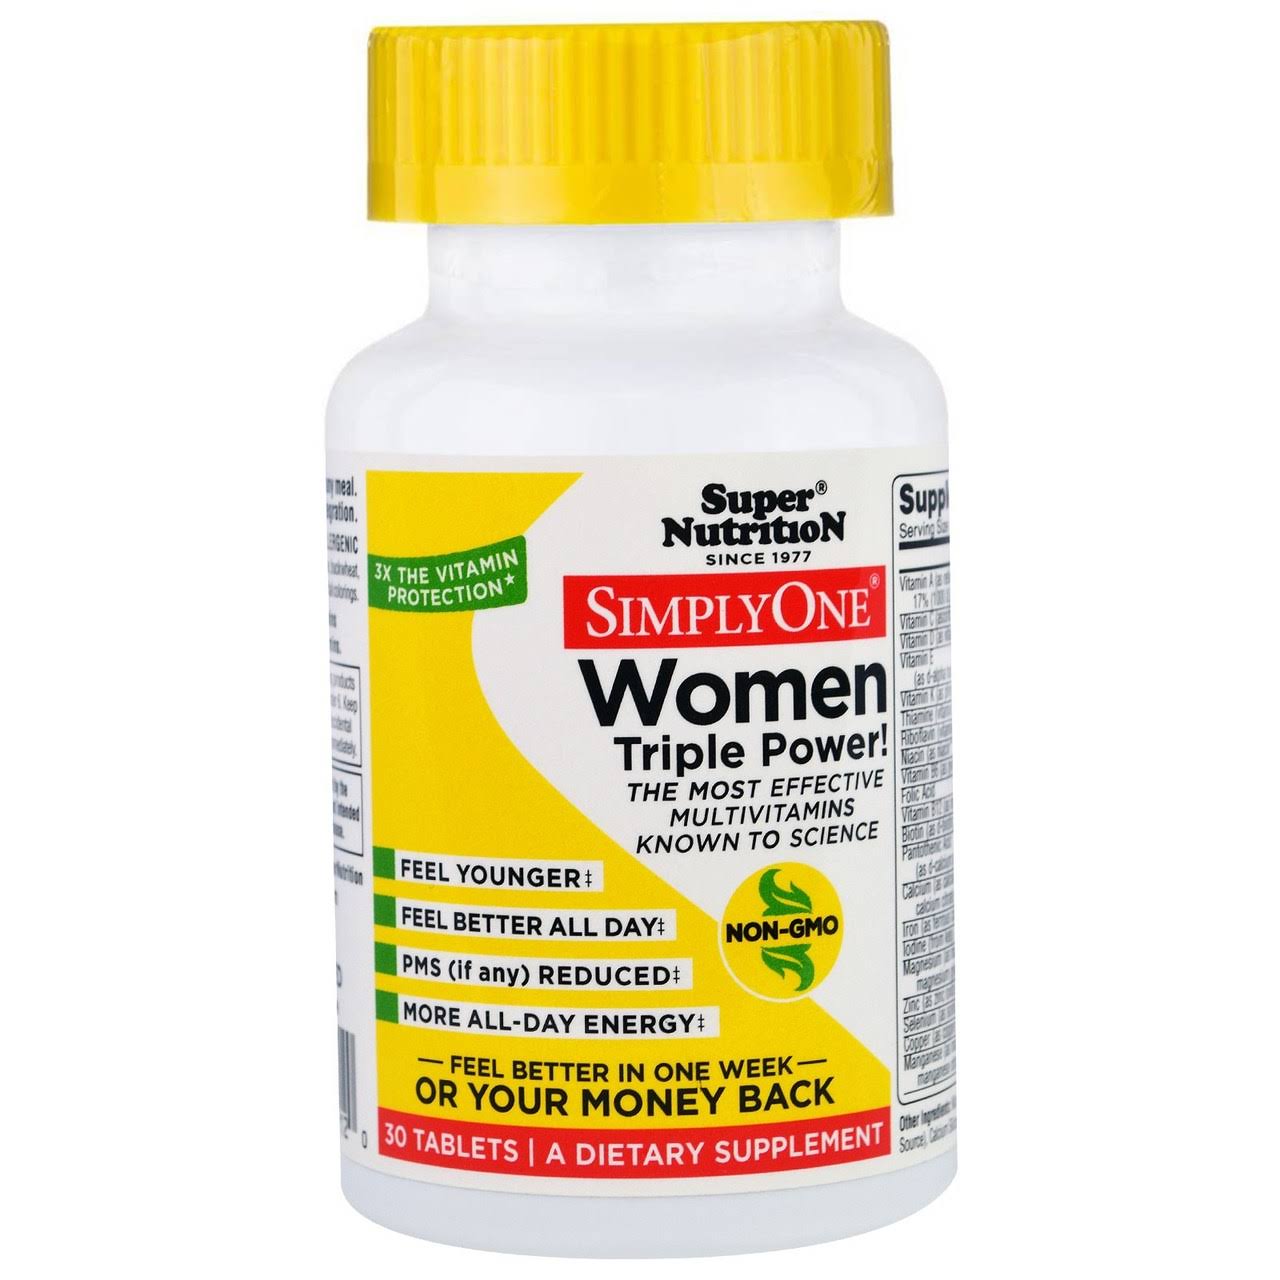 Super Nutrition Simply One Women Dietary Supplement - 30 Tablets